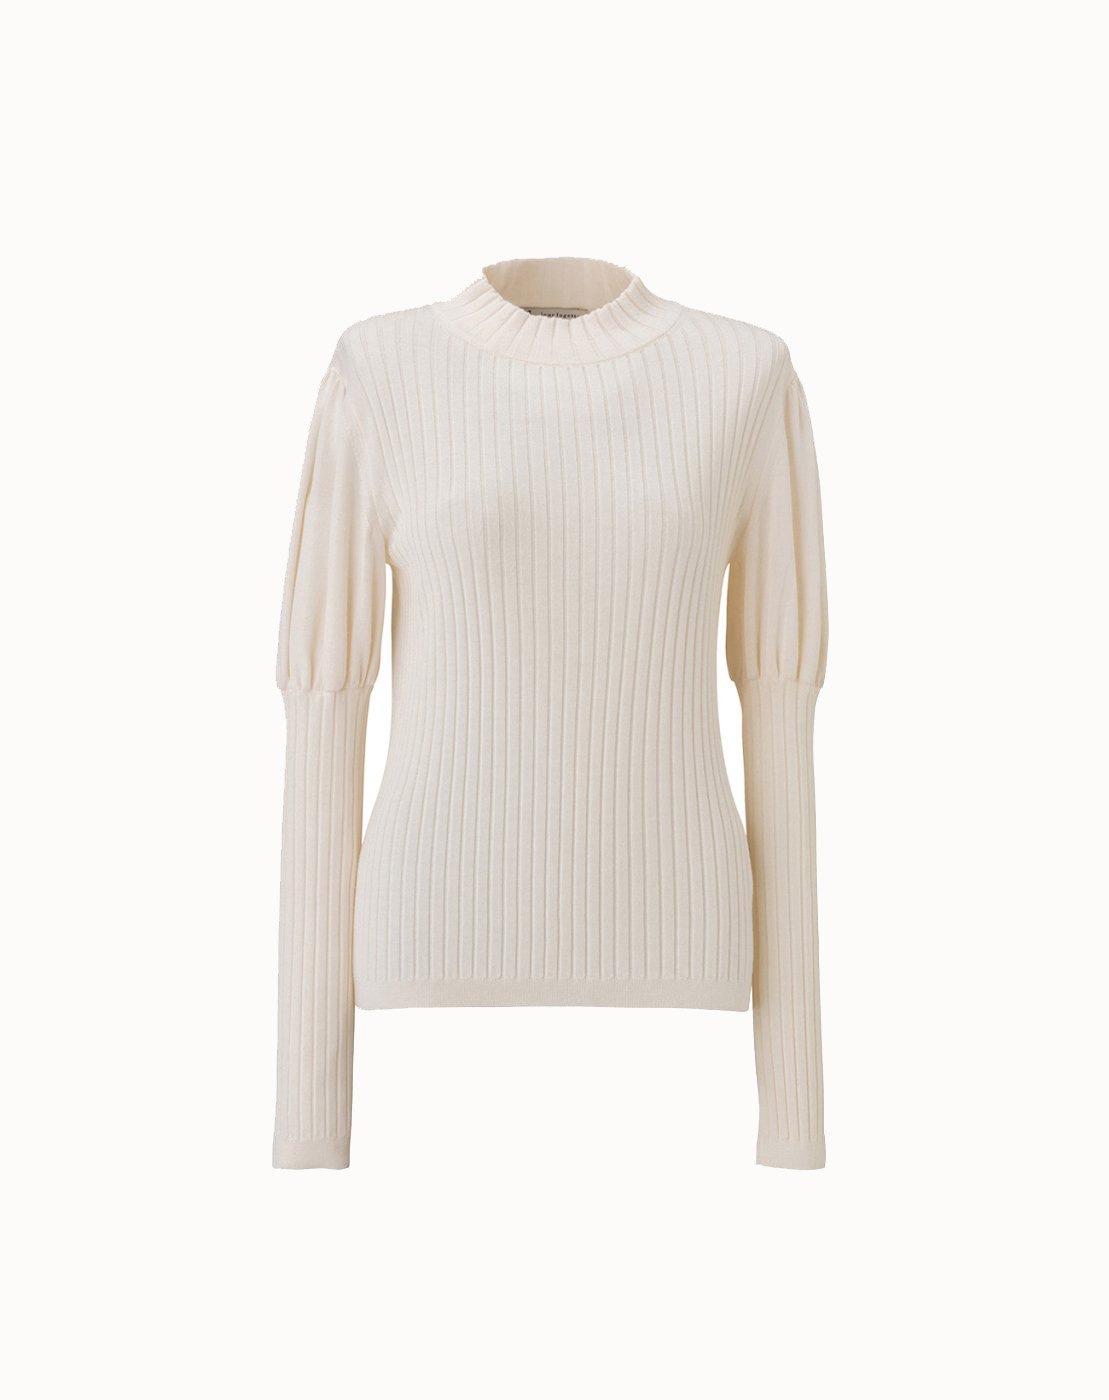 leur logette - <img class='new_mark_img1' src='https://img.shop-pro.jp/img/new/icons1.gif' style='border:none;display:inline;margin:0px;padding:0px;width:auto;' />Cashmere Silk Rib Top - Off White